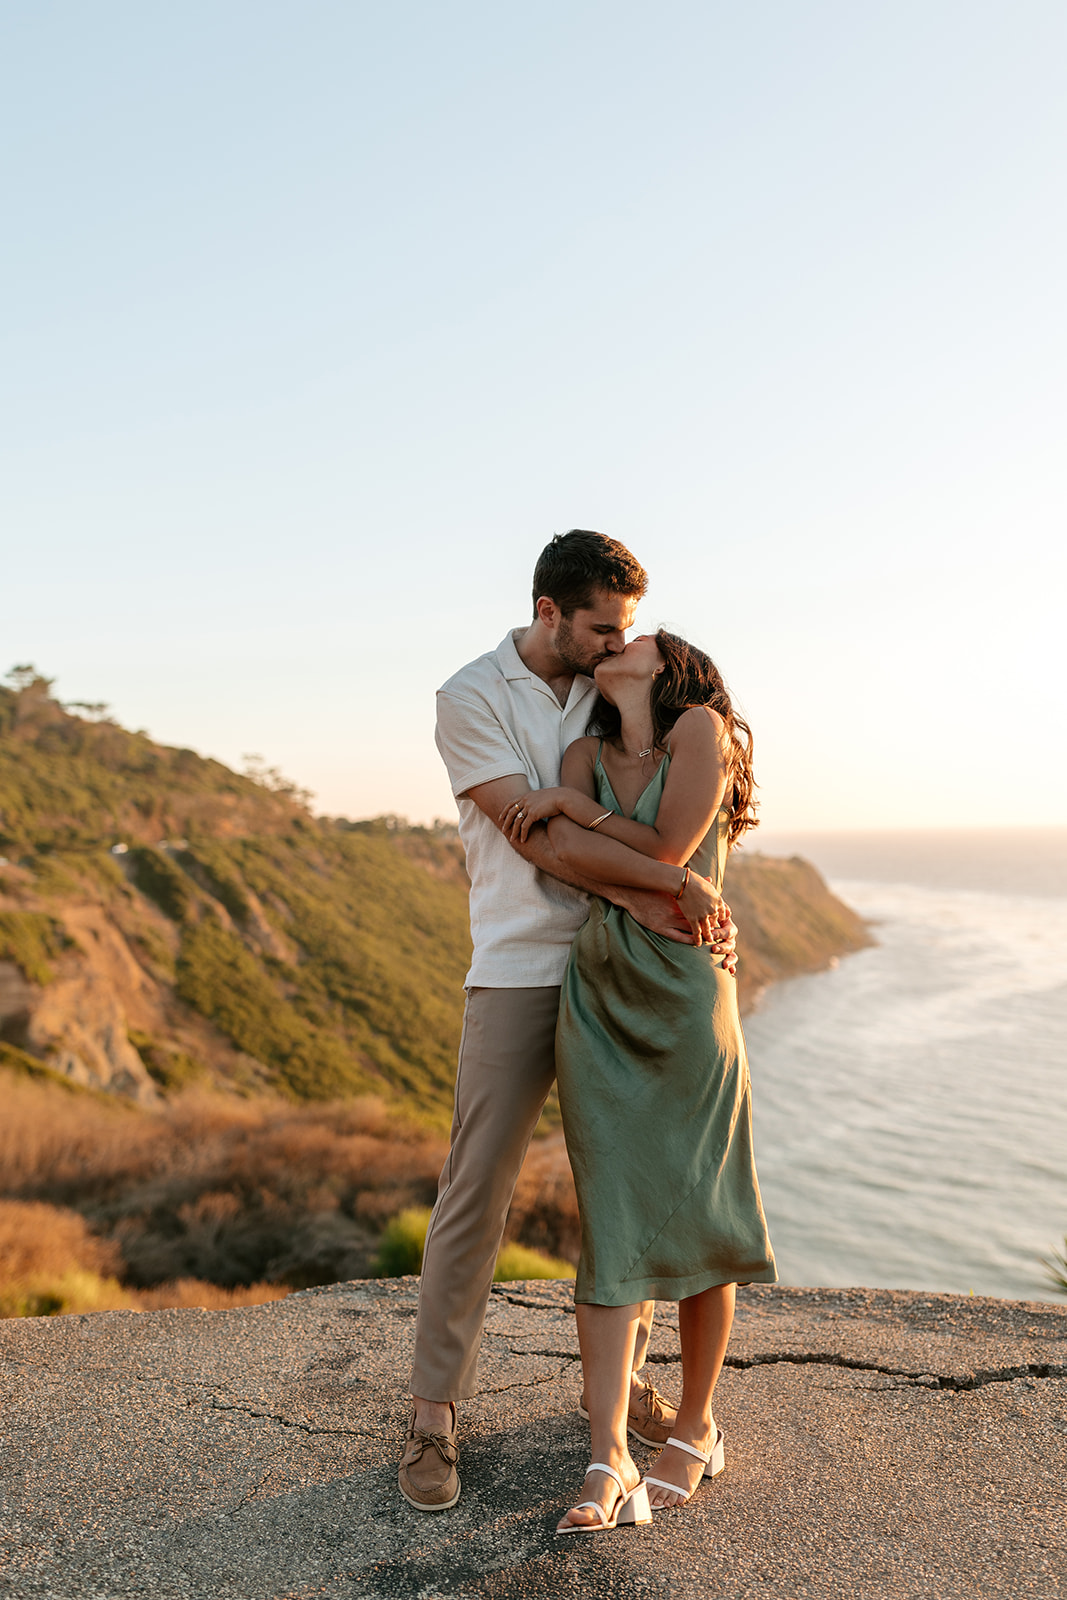 cliffside proposal engagement session palos verdes california socal  photography ideas couples poses ideas outfits